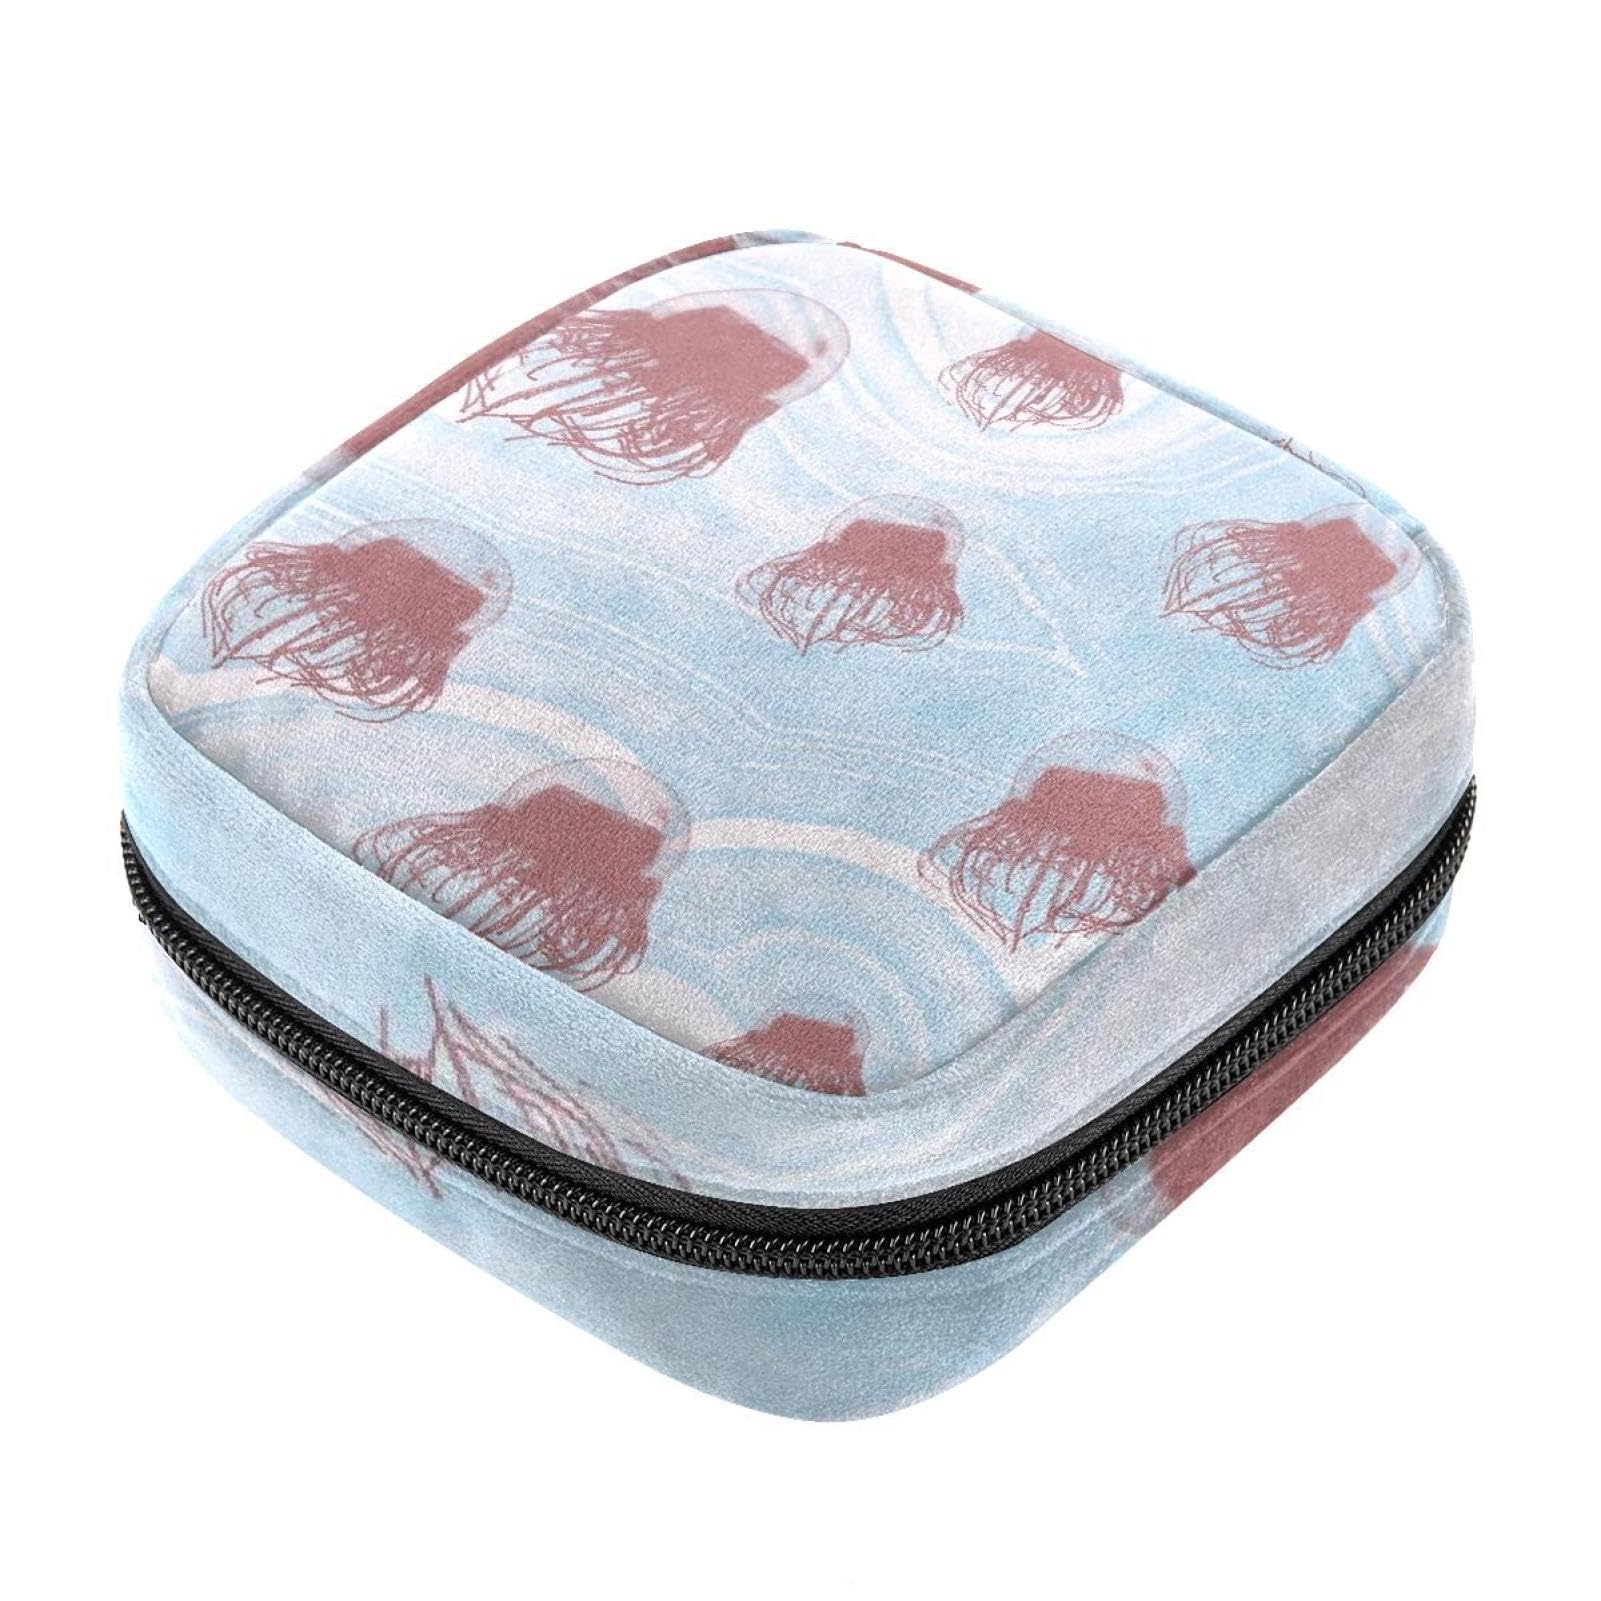 Period Pouch Portable Tampon Storage Bag,Tampon Holder for Purse Feminine  Product Organizer,Watermelon Slices Pattern : Health & Household 